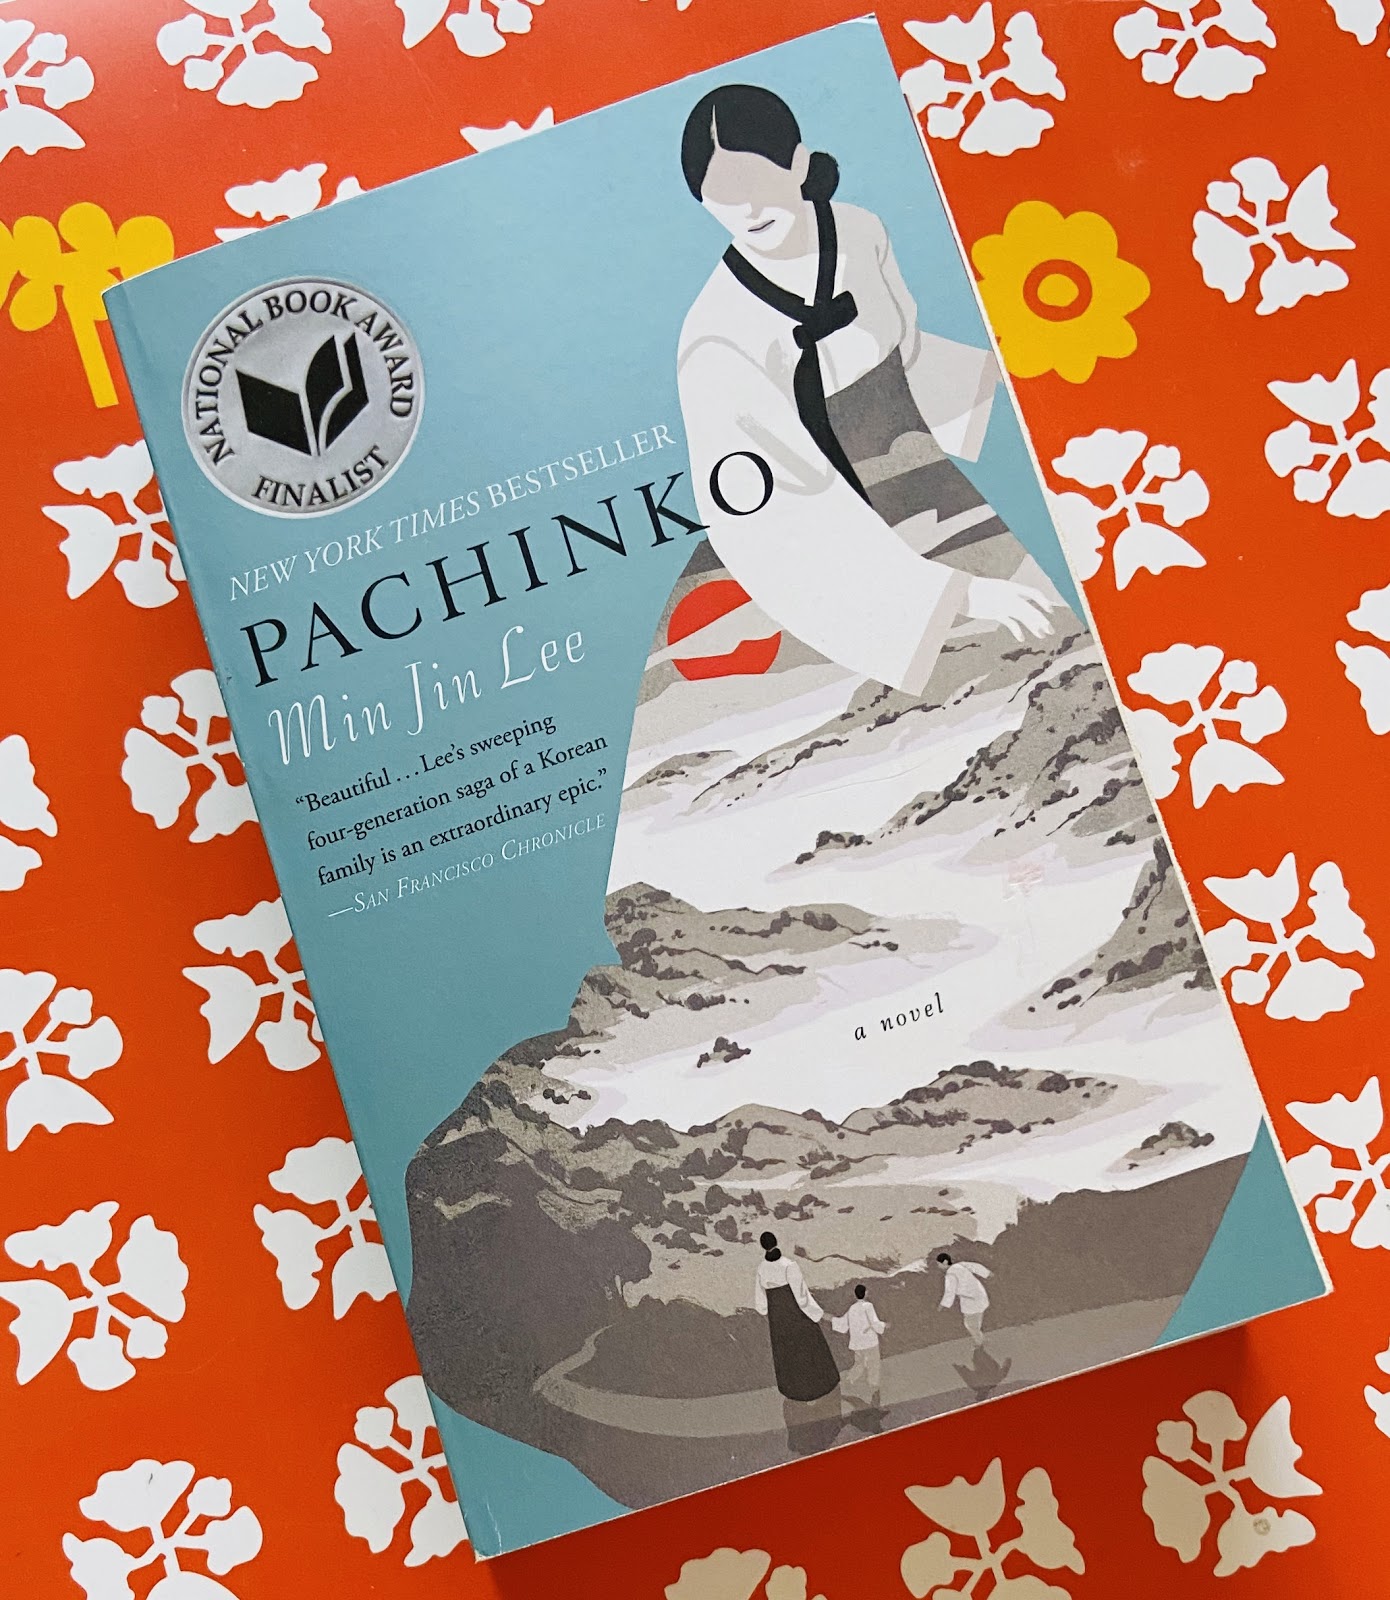 Taking a study break with a good book. Pictured: Pachinko by Min Jin Lee.